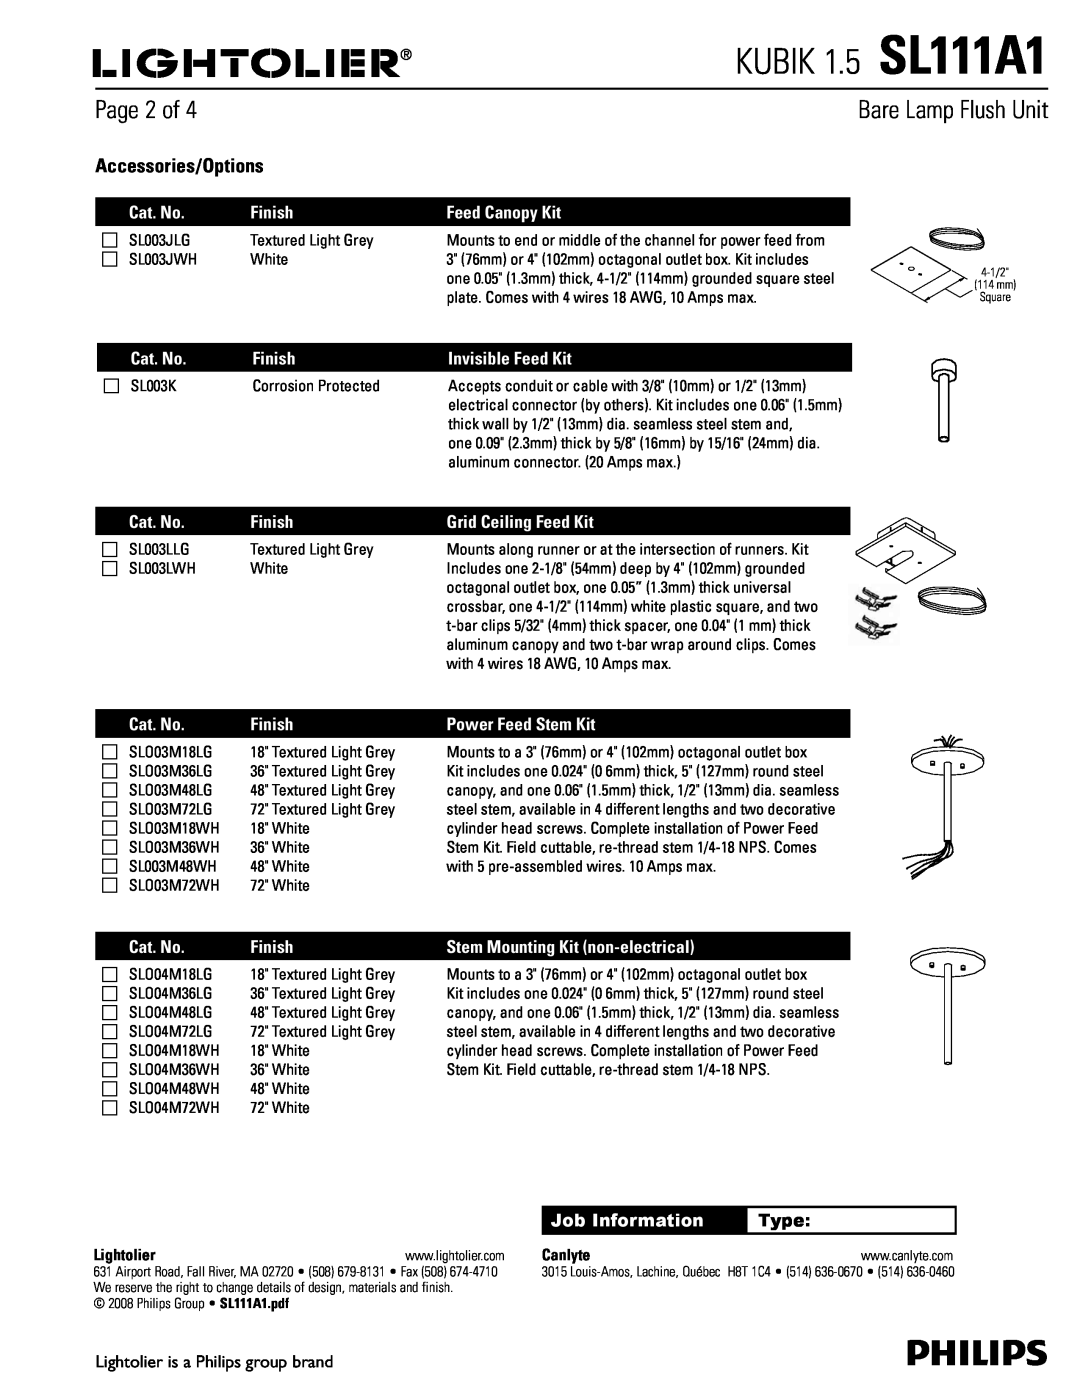 Philips dimensions Page 2 of, Accessories/Options, Type, KUBIK 1.5 SL111A1, Bare Lamp Flush Unit 